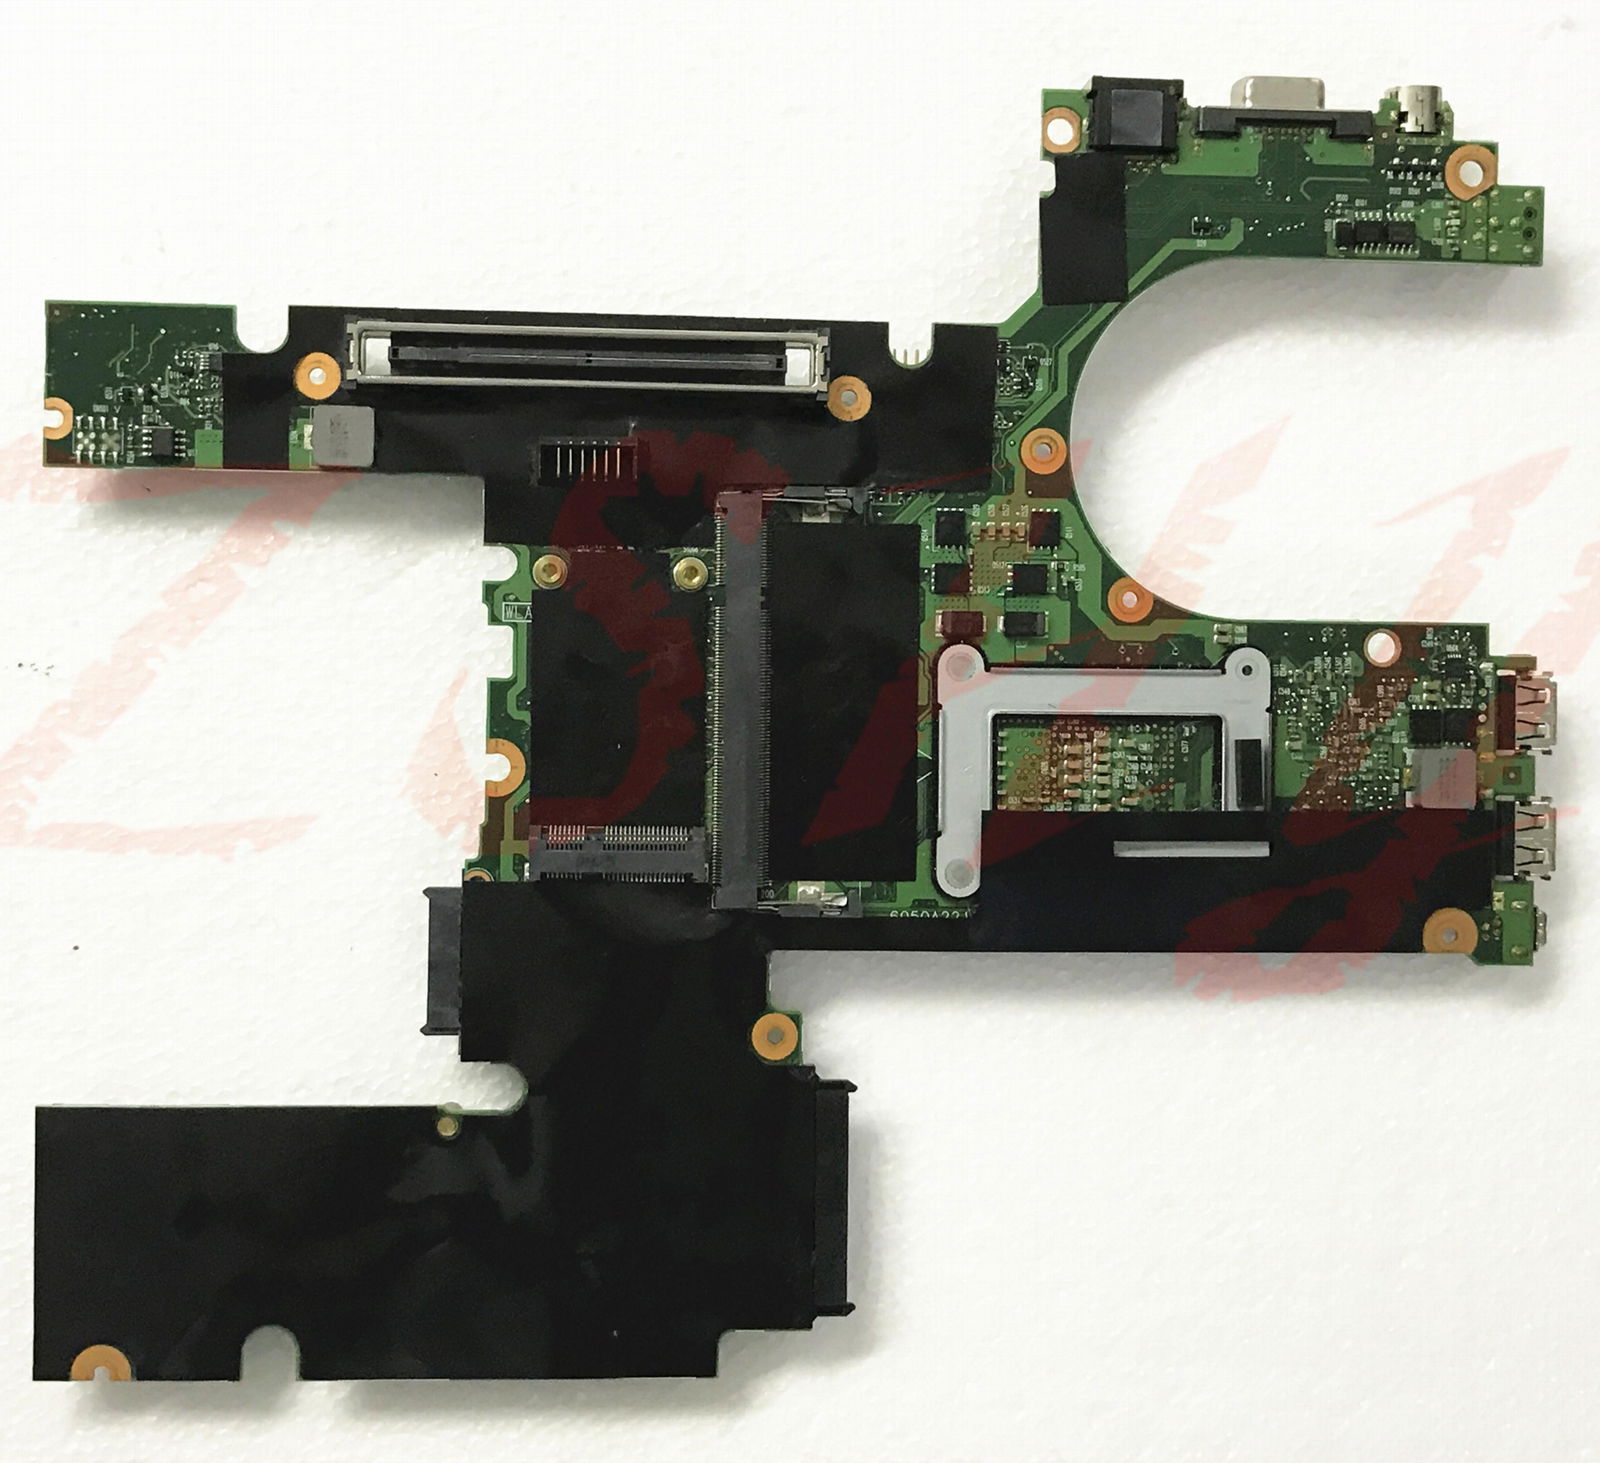 488194-001 for hp 6535b 6735b laptop motherboard ddr2 6050a2213601-mb-a03 Free S 2